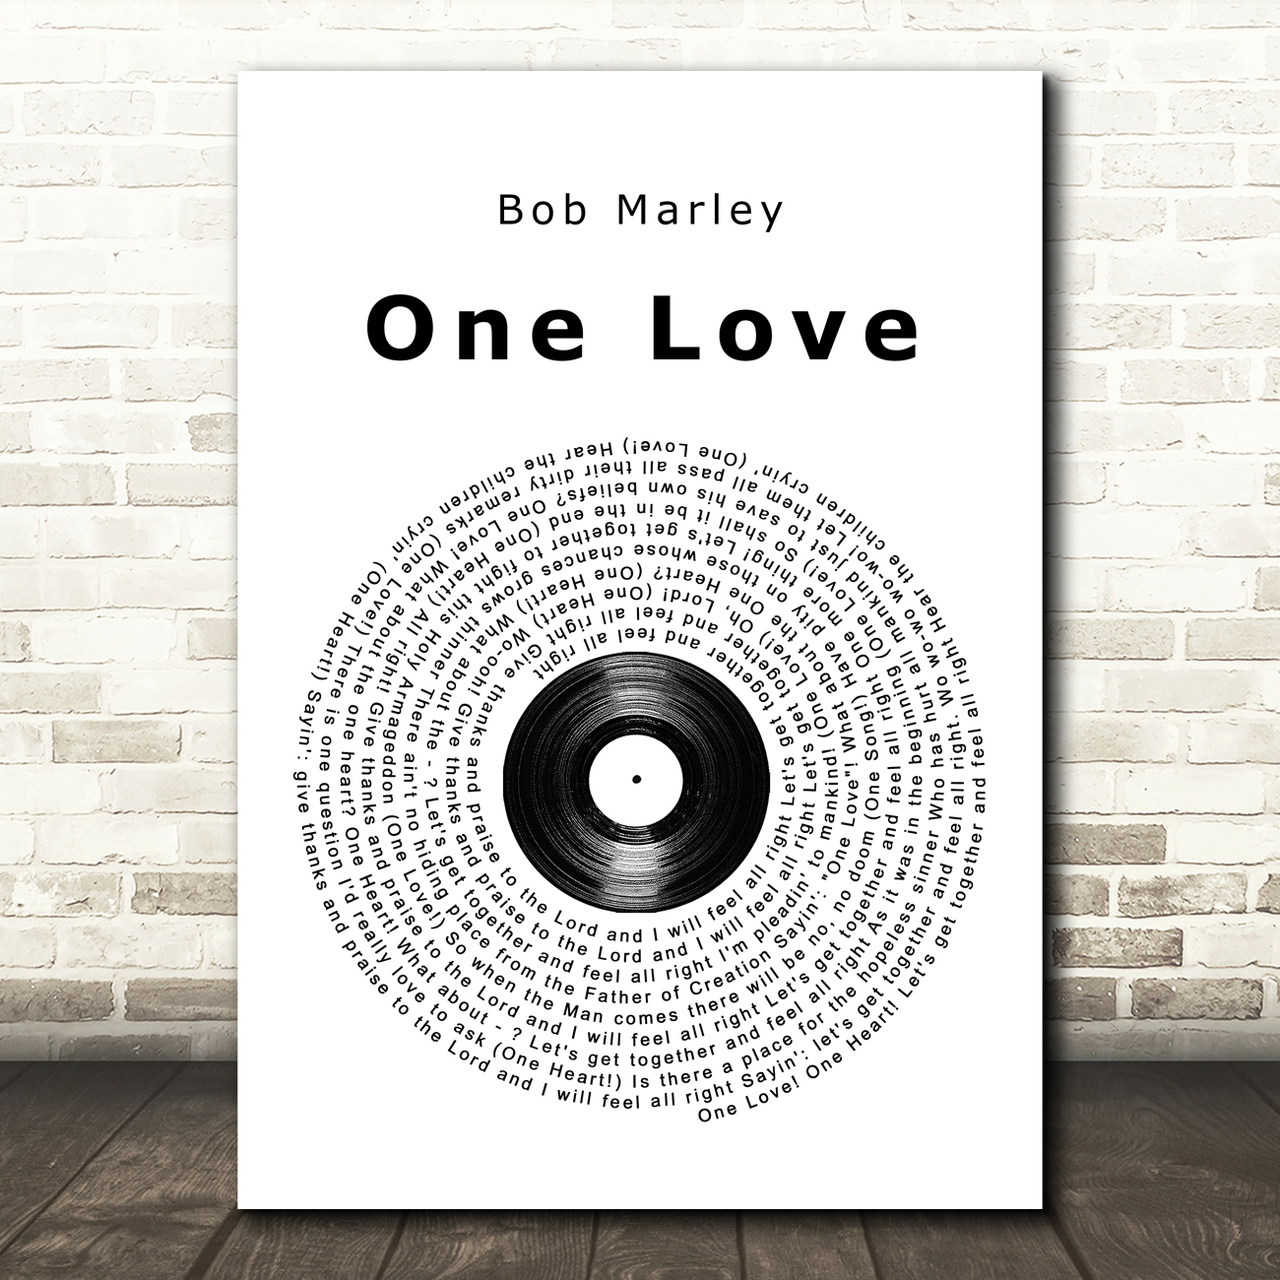 Bob Marley One Love People Get Ready Vinyl Record Song Lyric Quote Music Poster Print